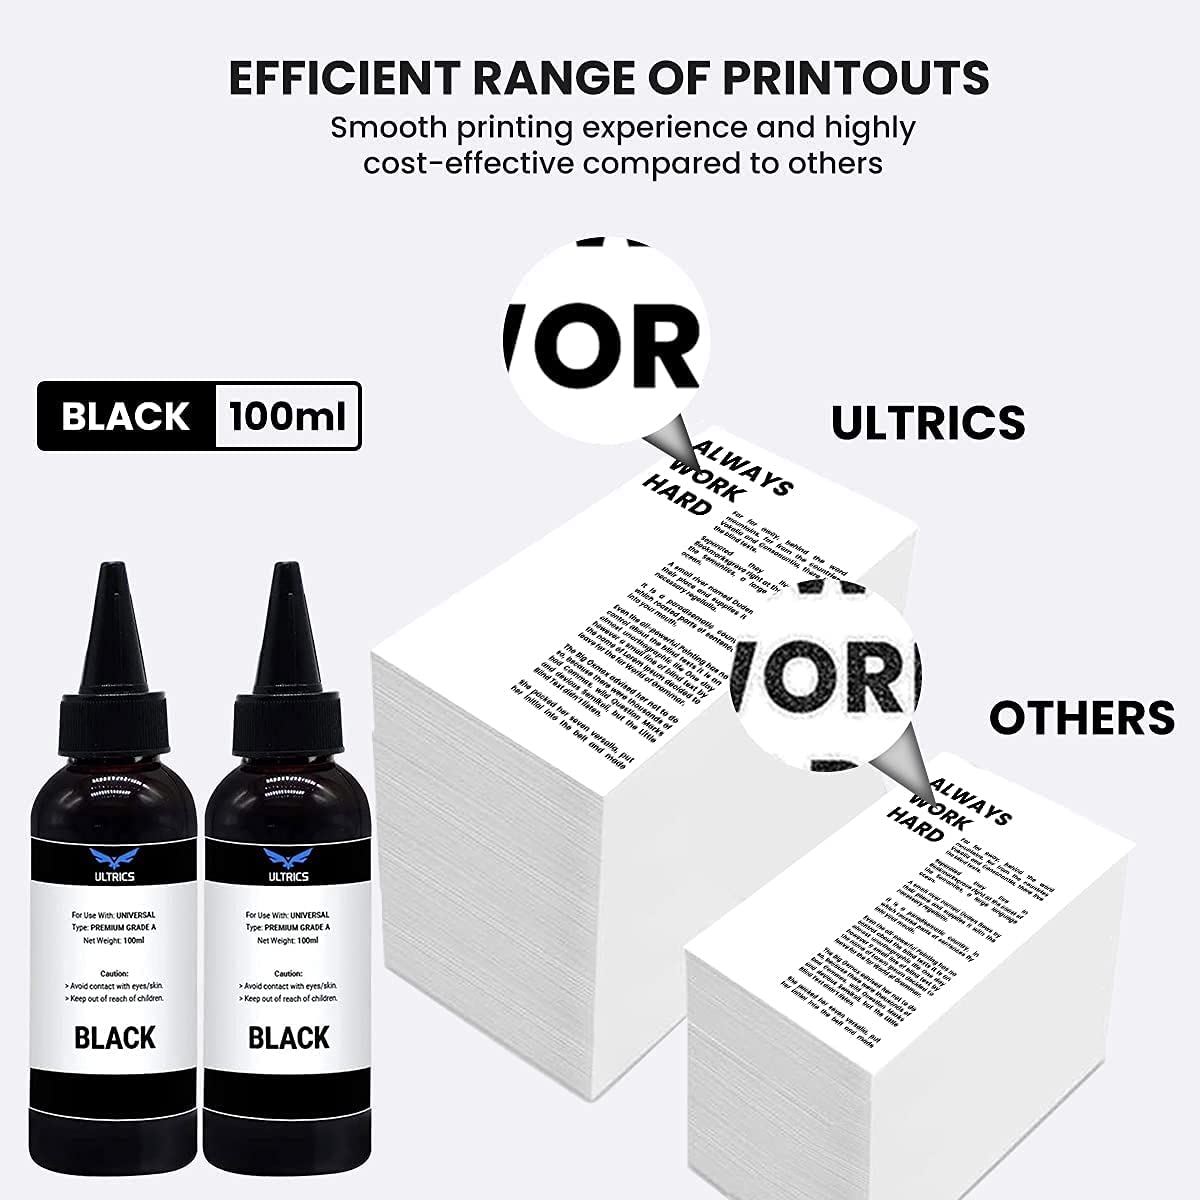 ULTRICS Refill Ink, 100ml Black Printer Ink Refill Kit, Universal Bulk Refillable Bottle of CISS System Compatible with Epson, Canon, Brother, Lexmark, Ricoh, Dell, HP, Kodak, Samsung, Xerox - 2 Pack